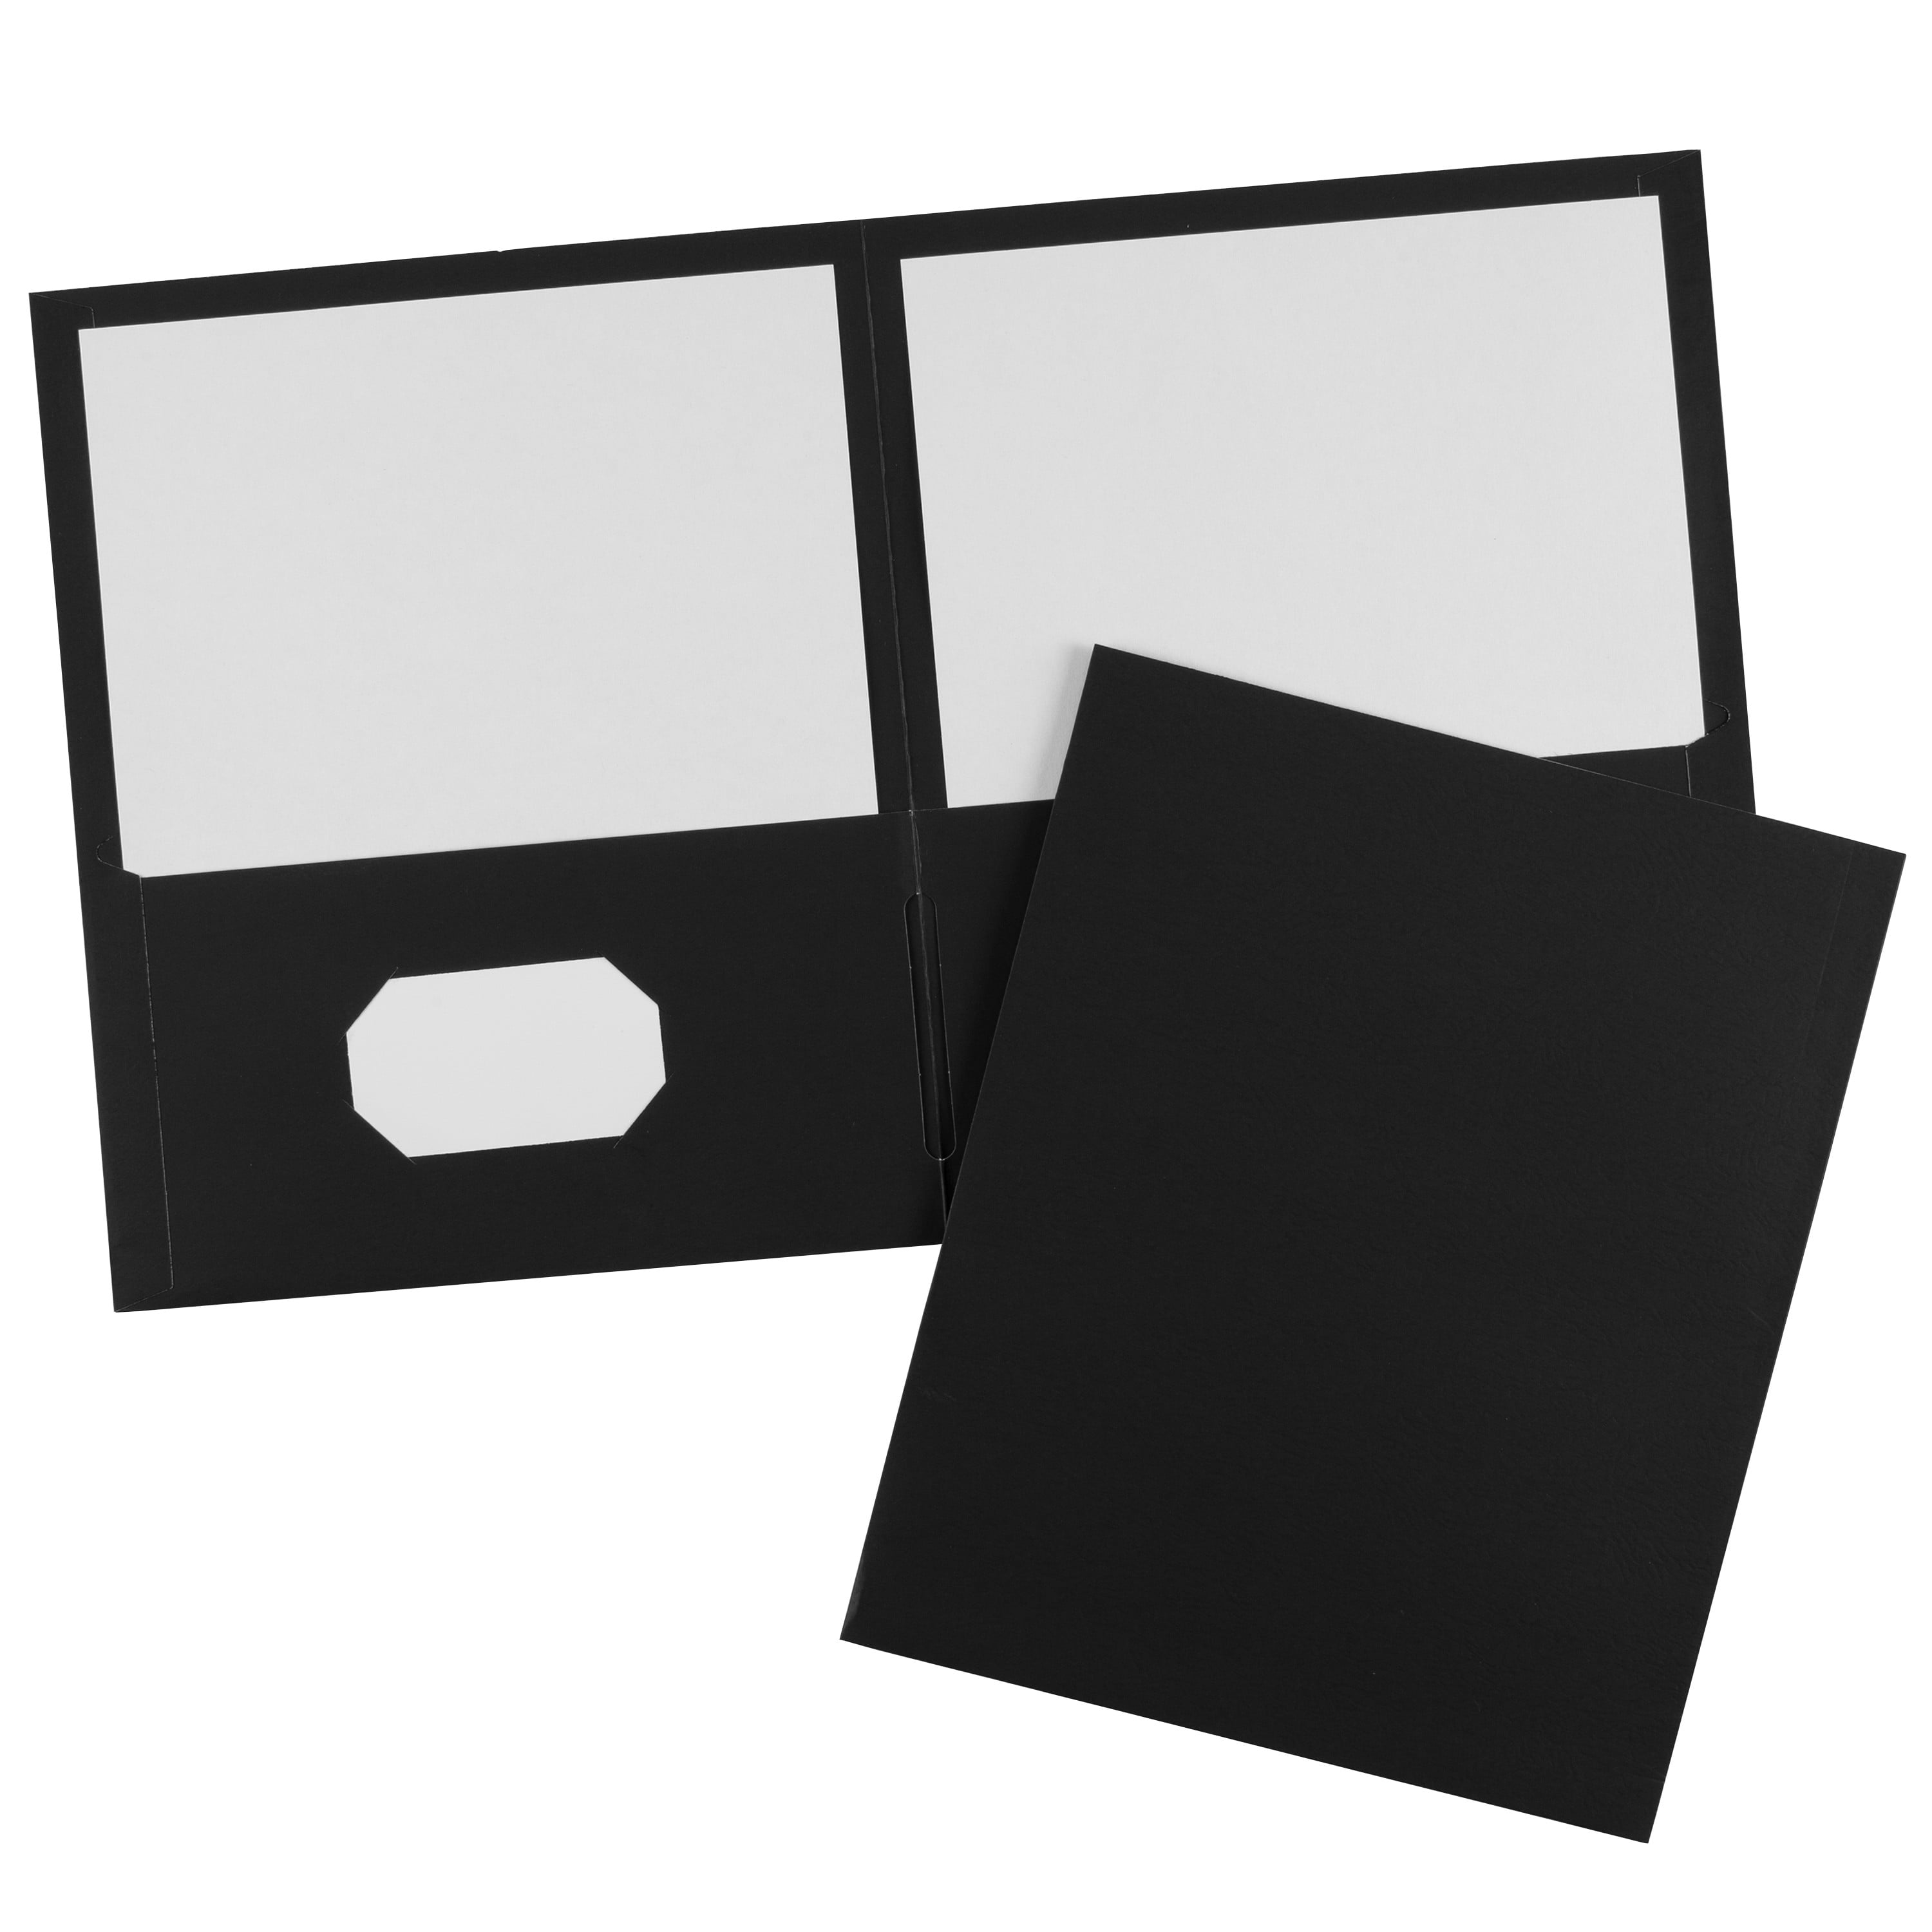 Two Pocket Folders - New 47990 25 Gray Folders Business Card Slot Holds up to 40 Sheets